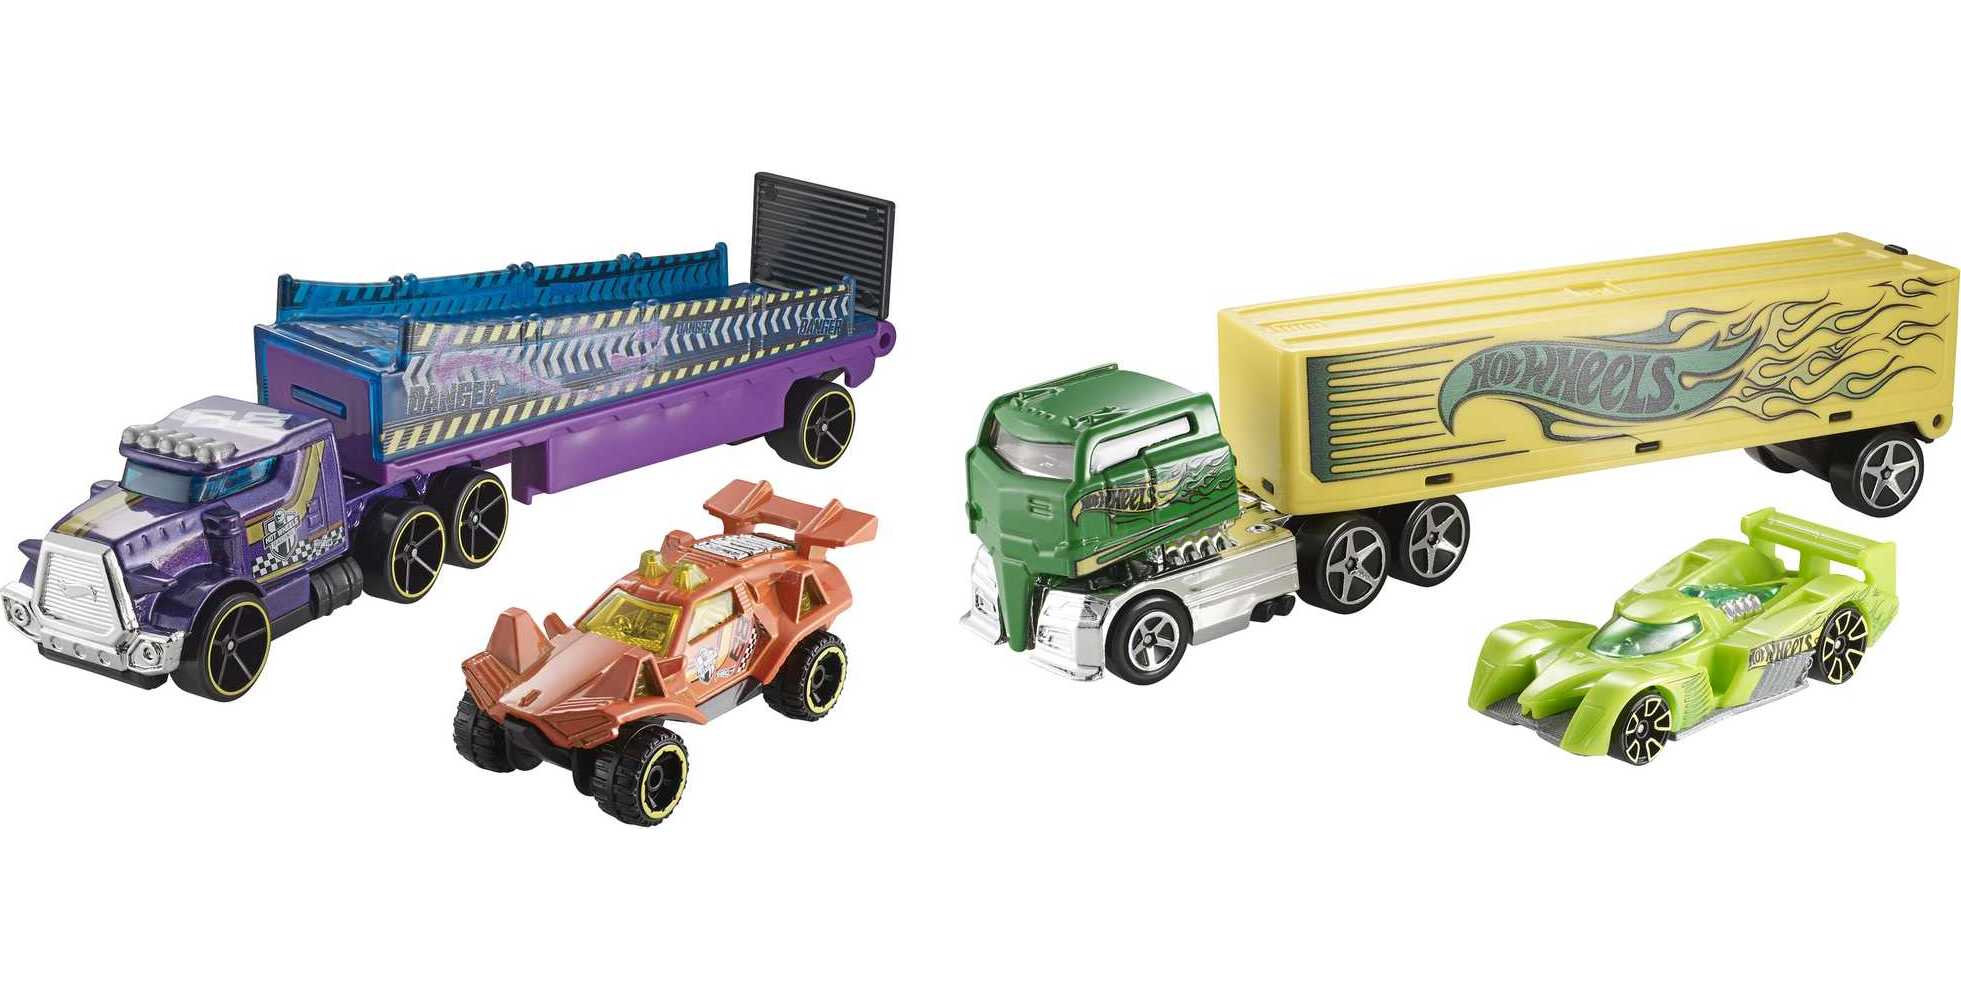 Hot Wheels Super Rigs, Toy Transporter Truck & Toy Car in 1:64 Scale (Styles May Vary) - image 5 of 6